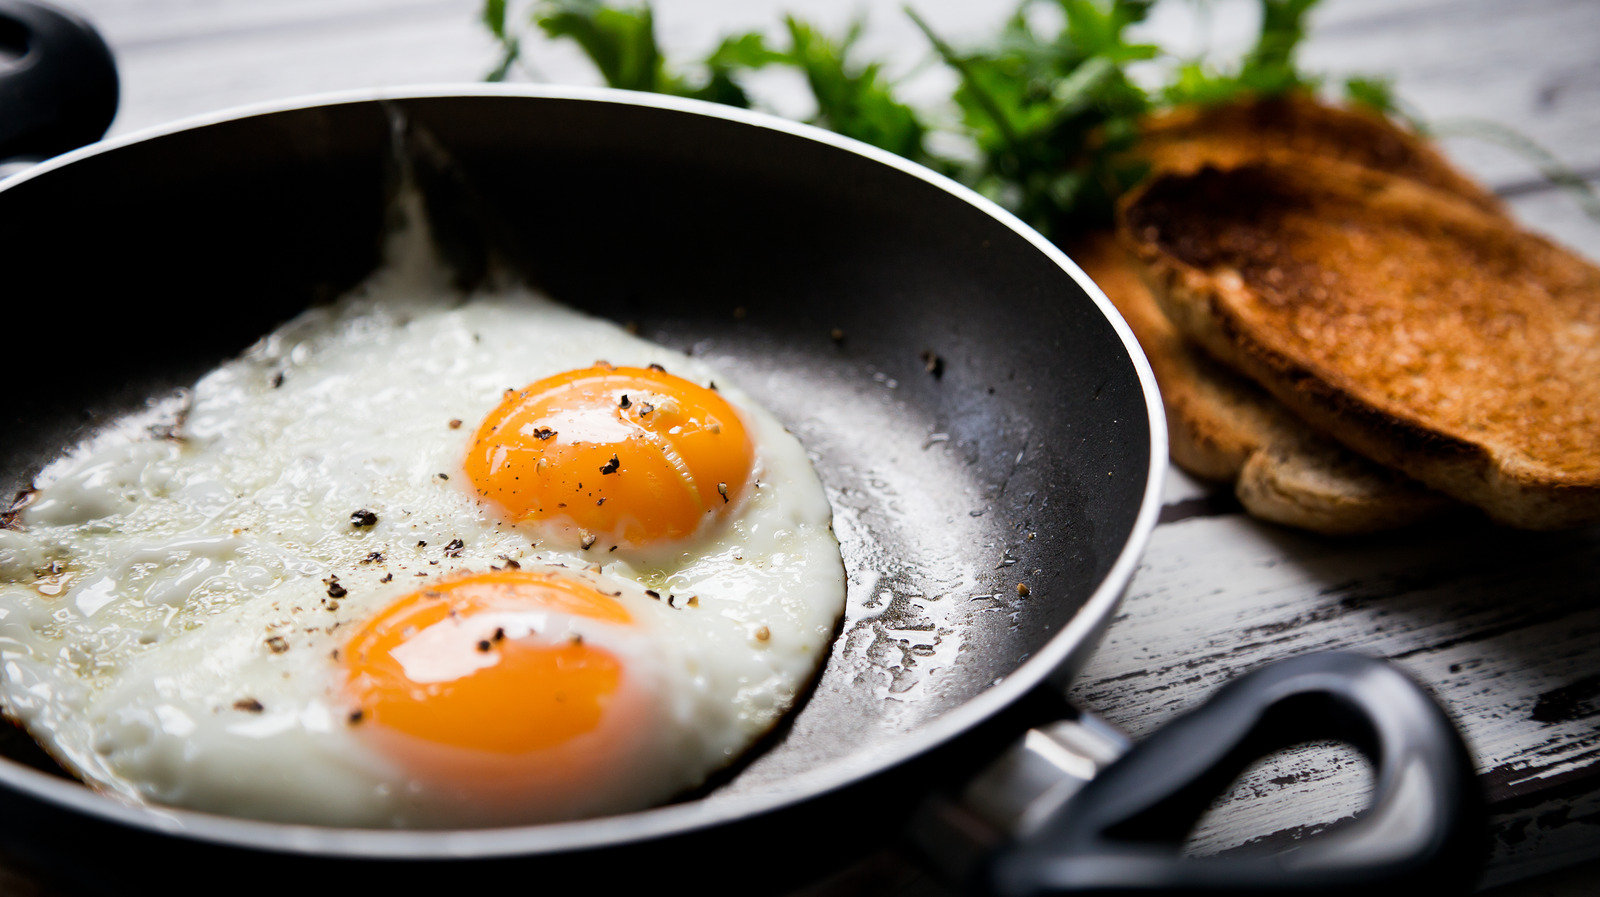 https://www.thedailymeal.com/img/gallery/the-8-best-pans-for-frying-eggs/l-intro-1676314508.jpg